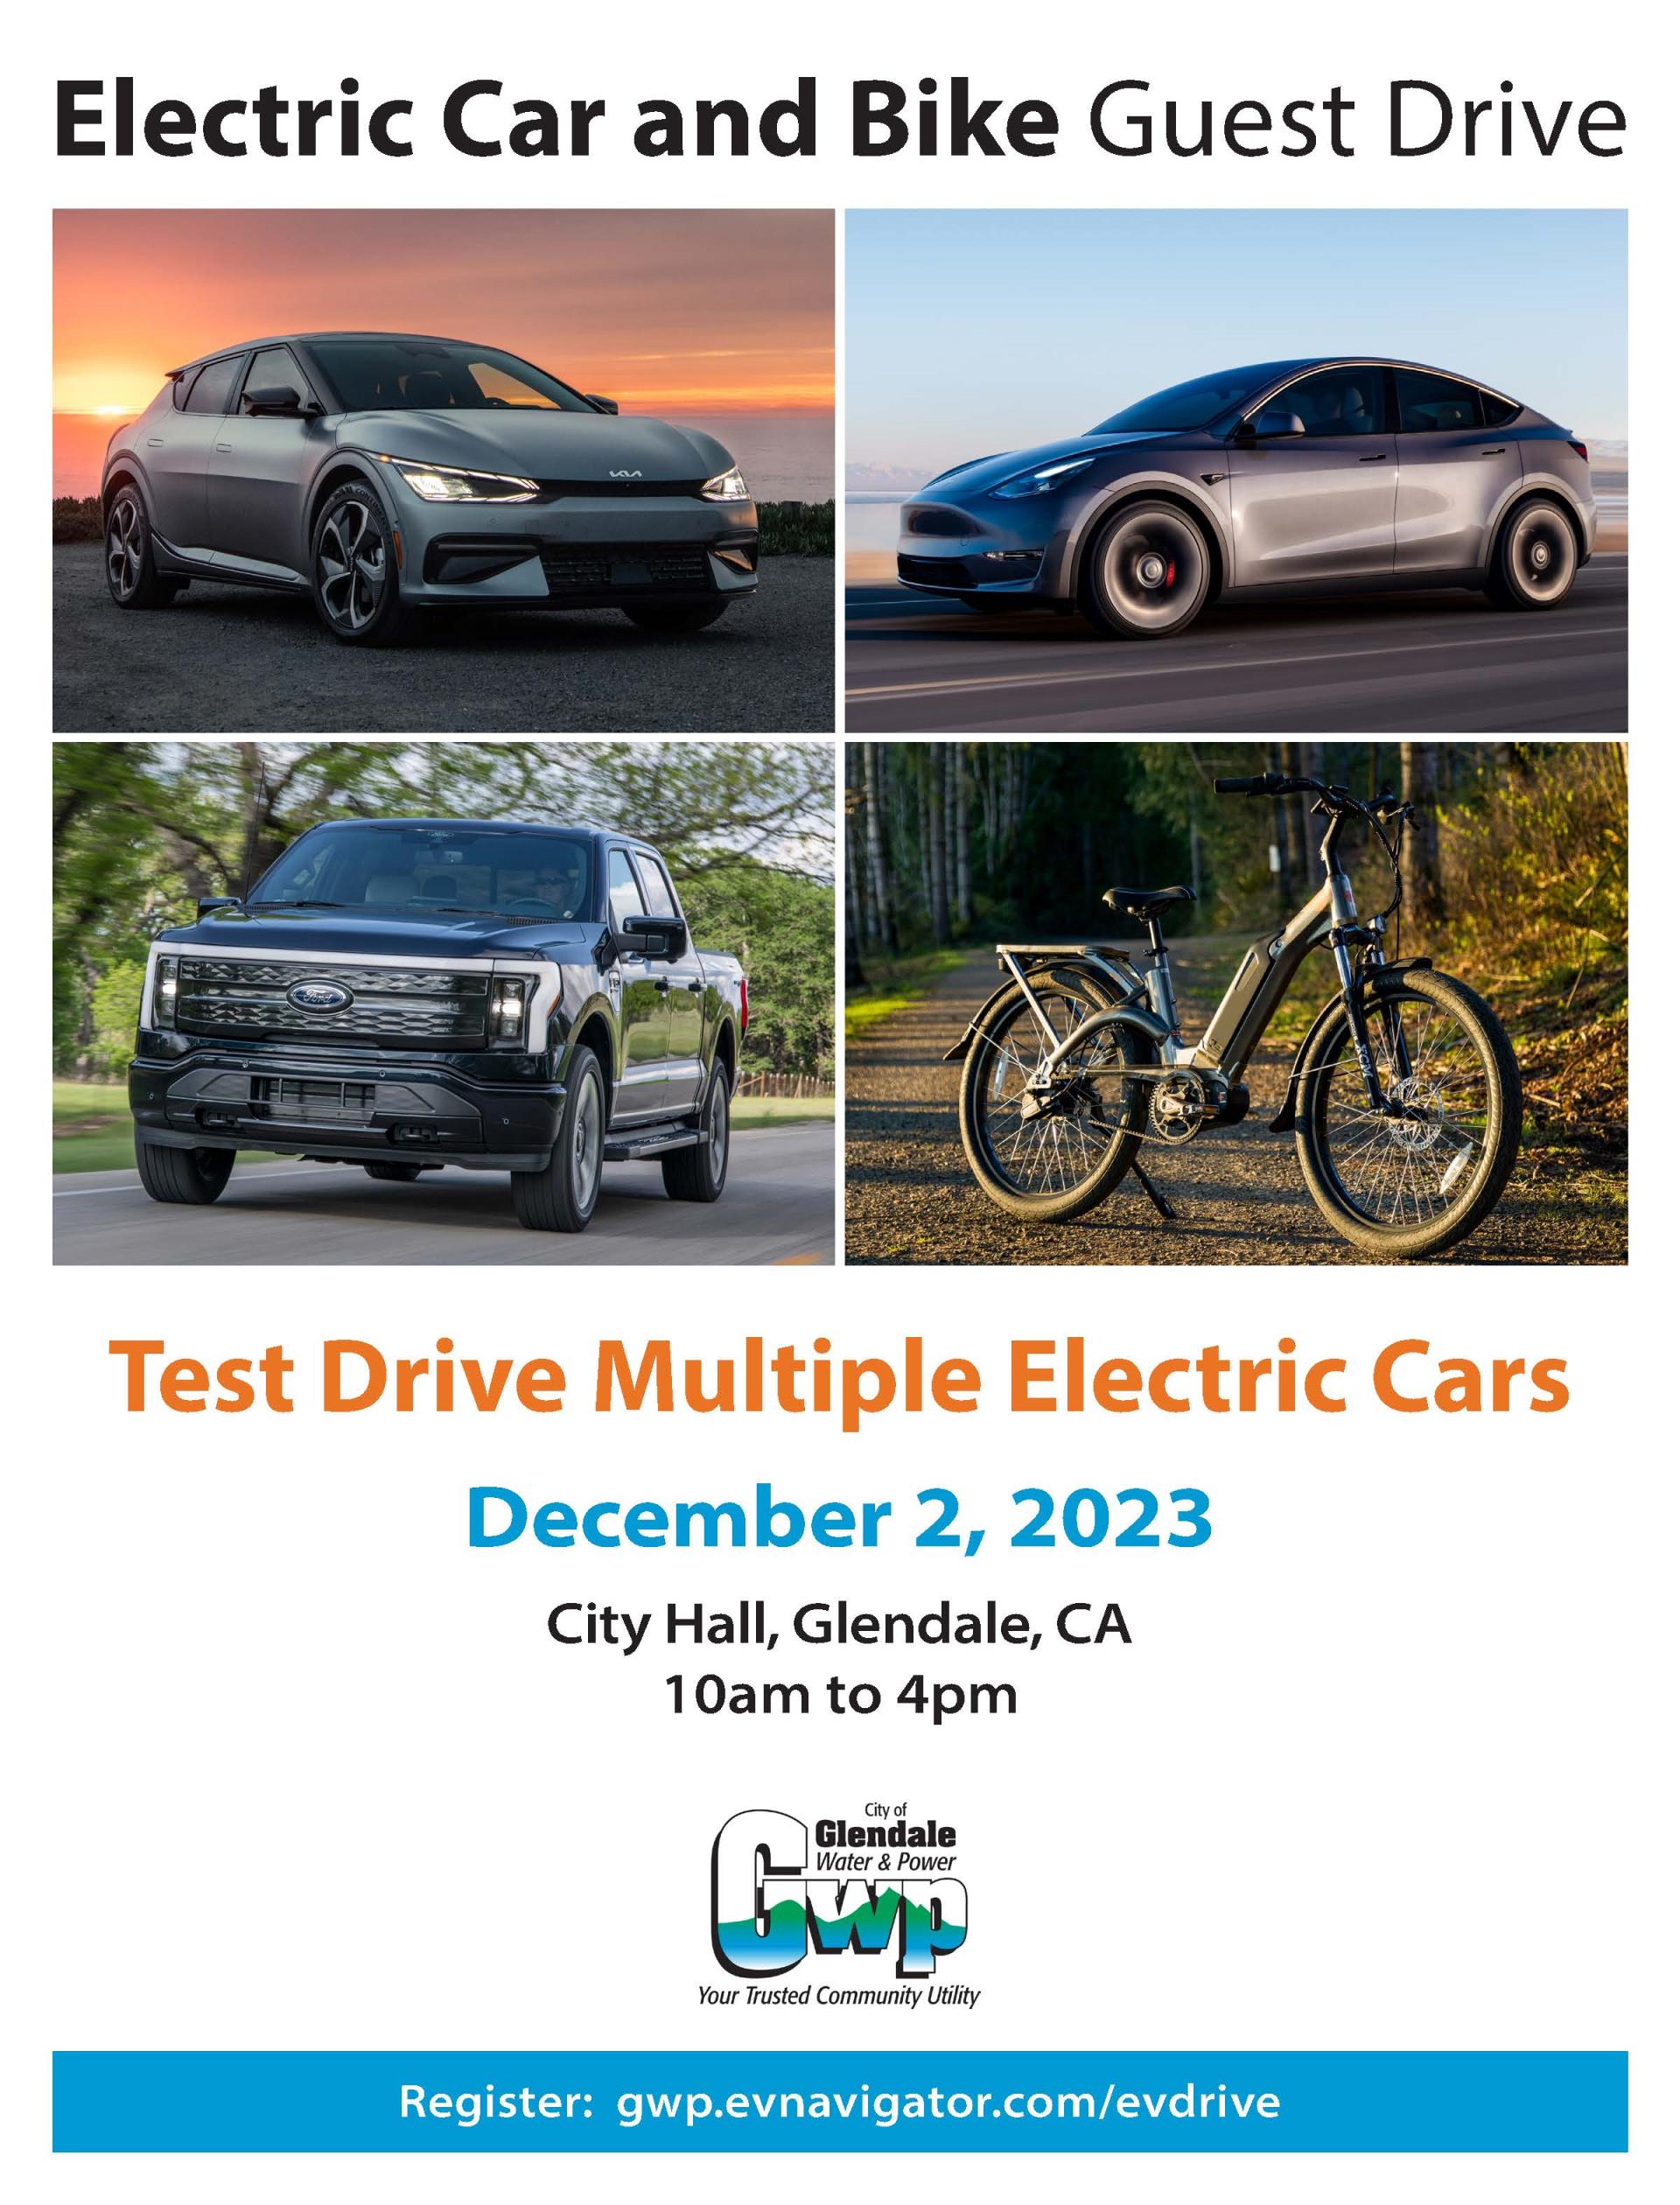 Electric Car and Bike Guest Drive Event GWP 